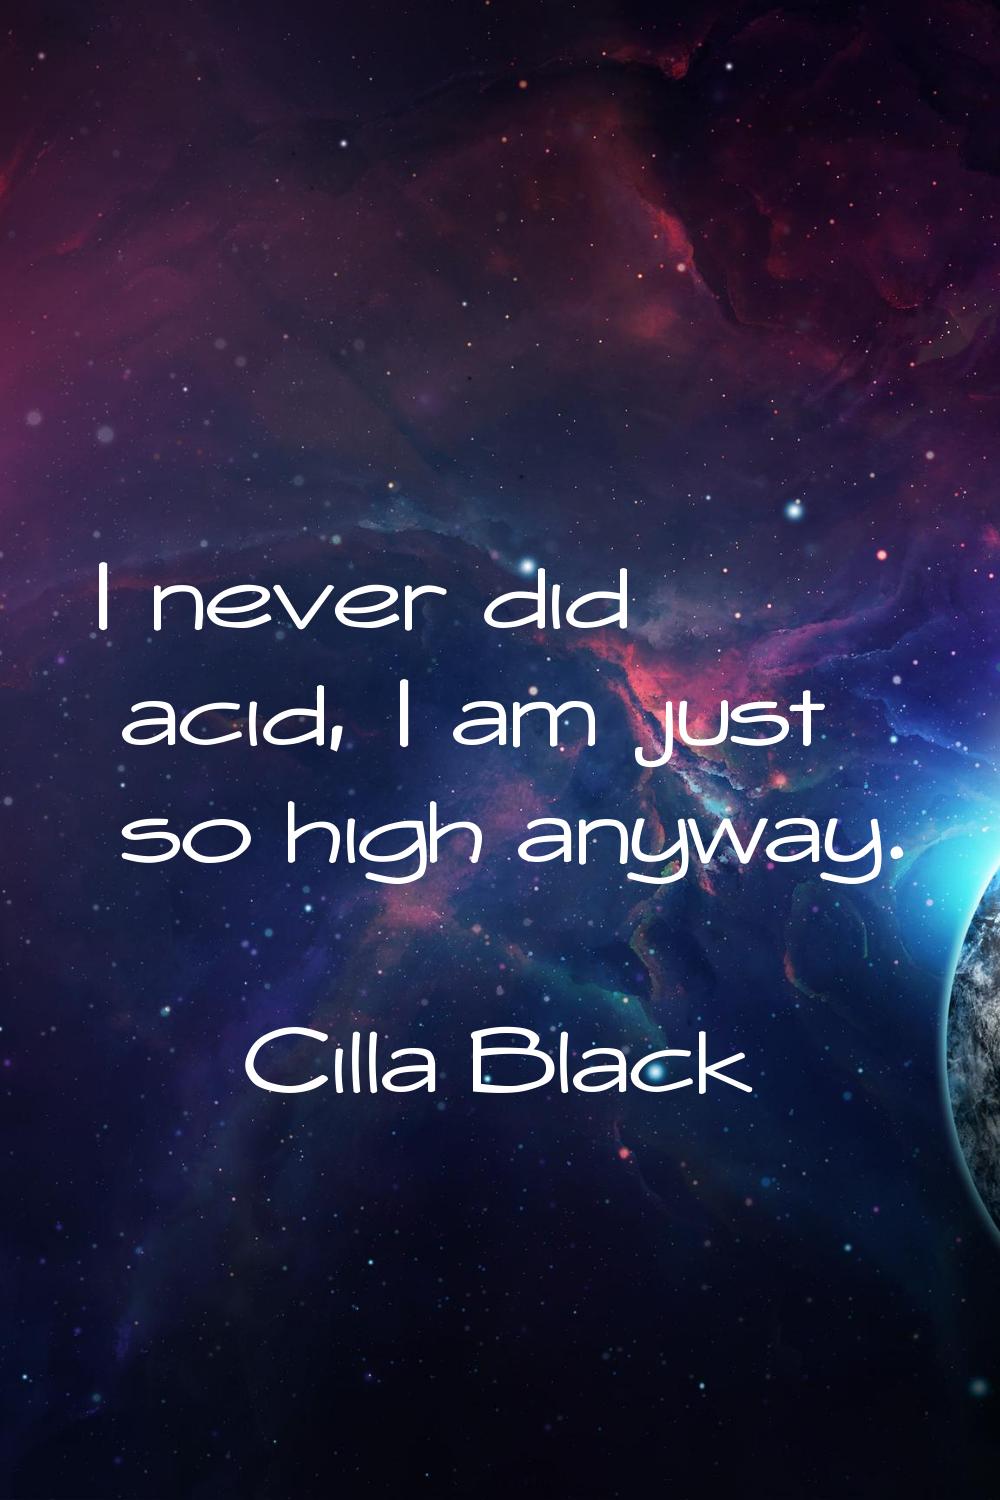 I never did acid, I am just so high anyway.